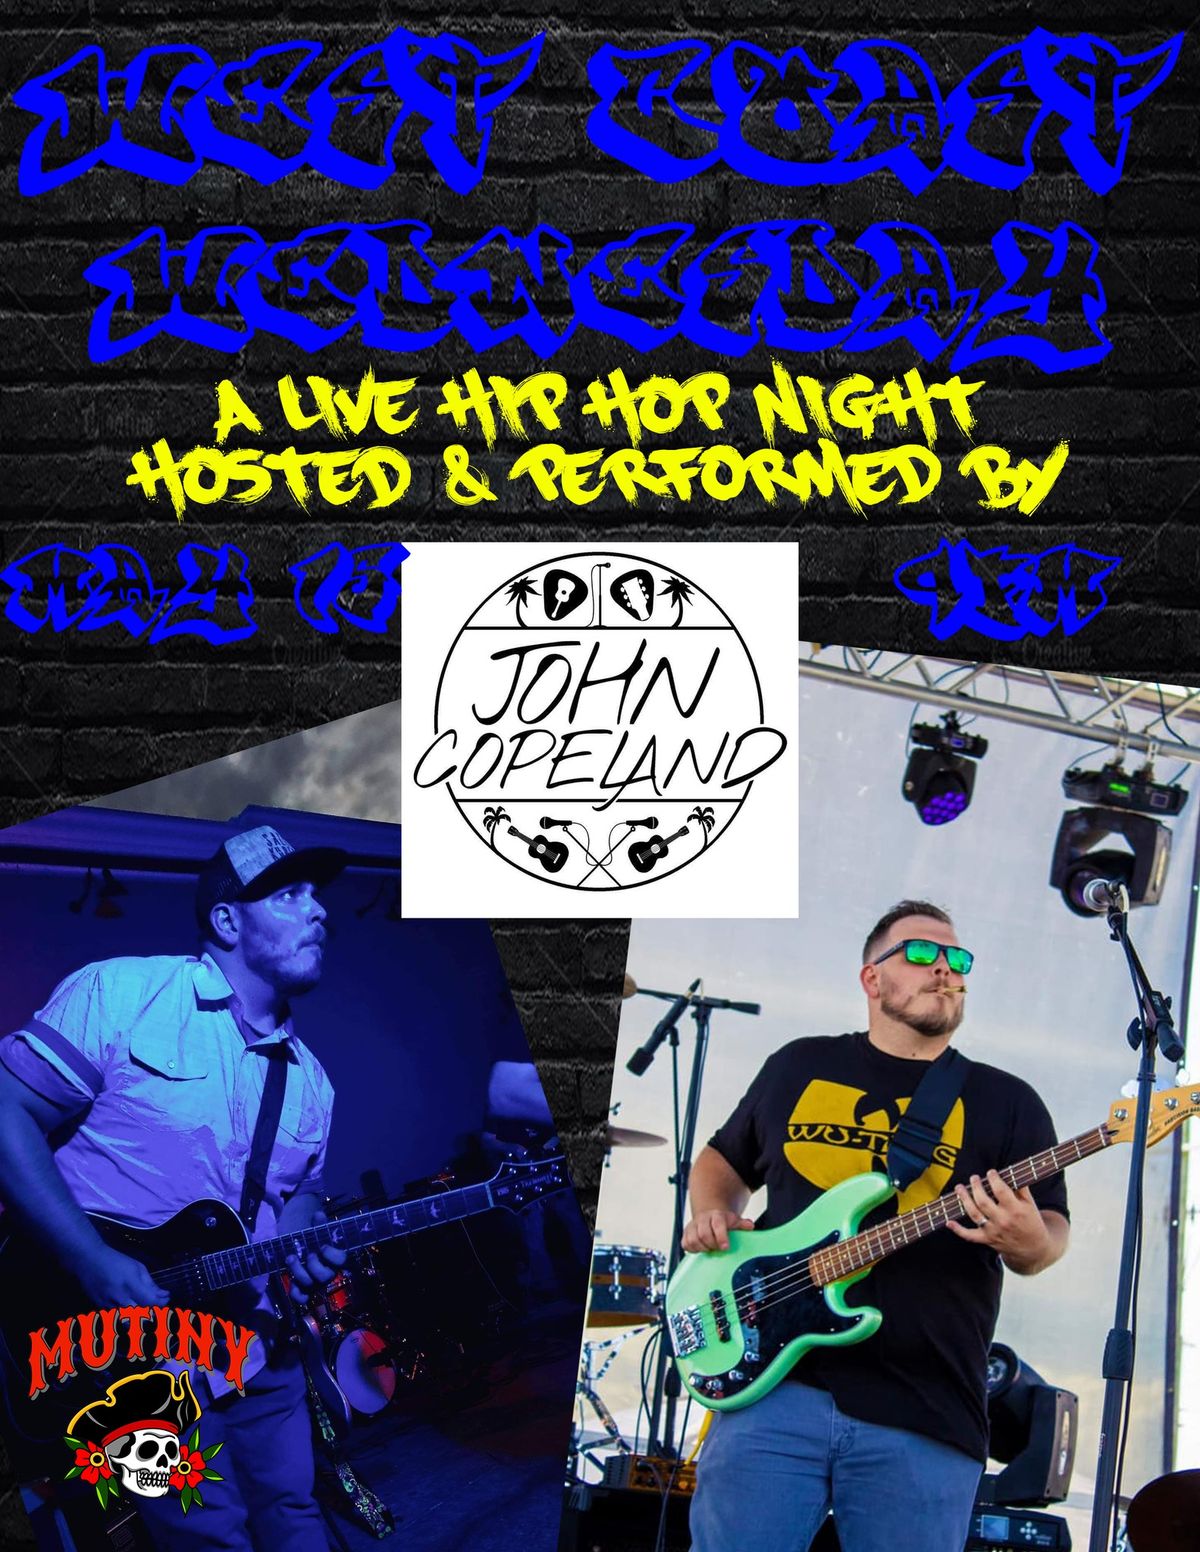 West Coast Wednesday - A live Hip Hop Night hosted & performed by John Copeland